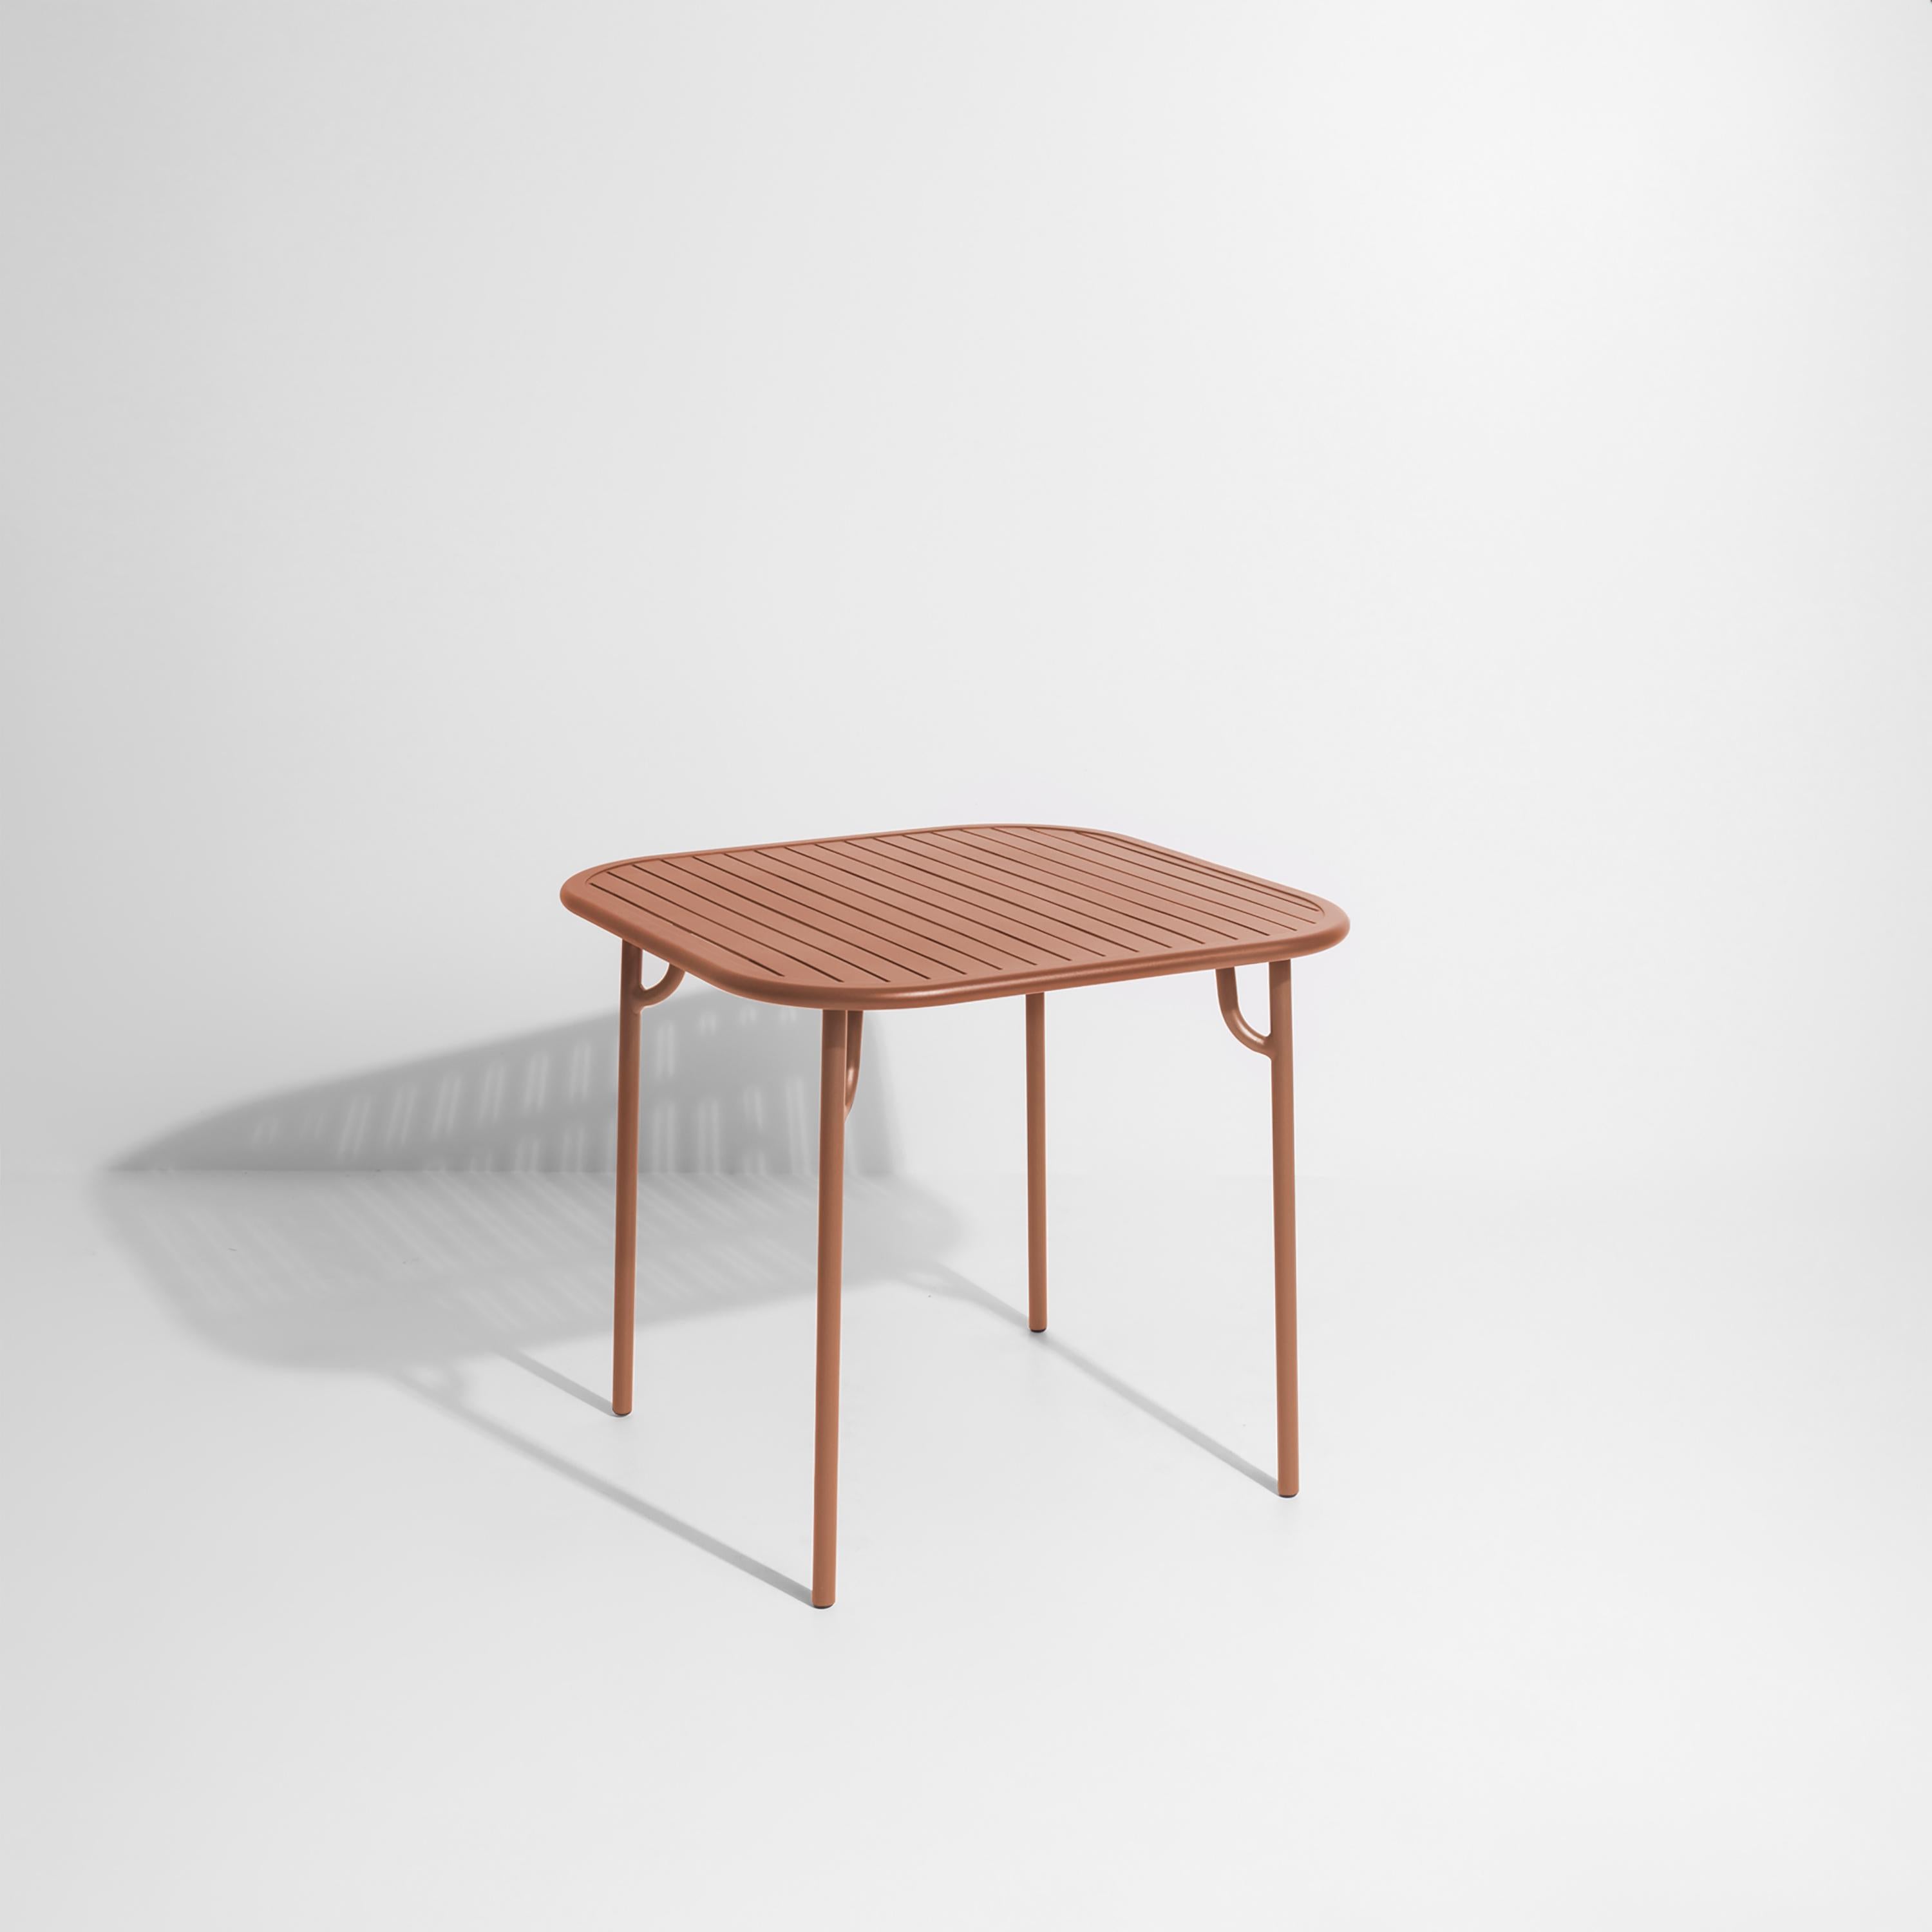 Petite Friture Week-End Square Dining Table in Terracotta Aluminium with Slats by Studio BrichetZiegler, 2017

The week-end collection is a full range of outdoor furniture, in aluminium grained epoxy paint, matt finish, that includes 18 functions